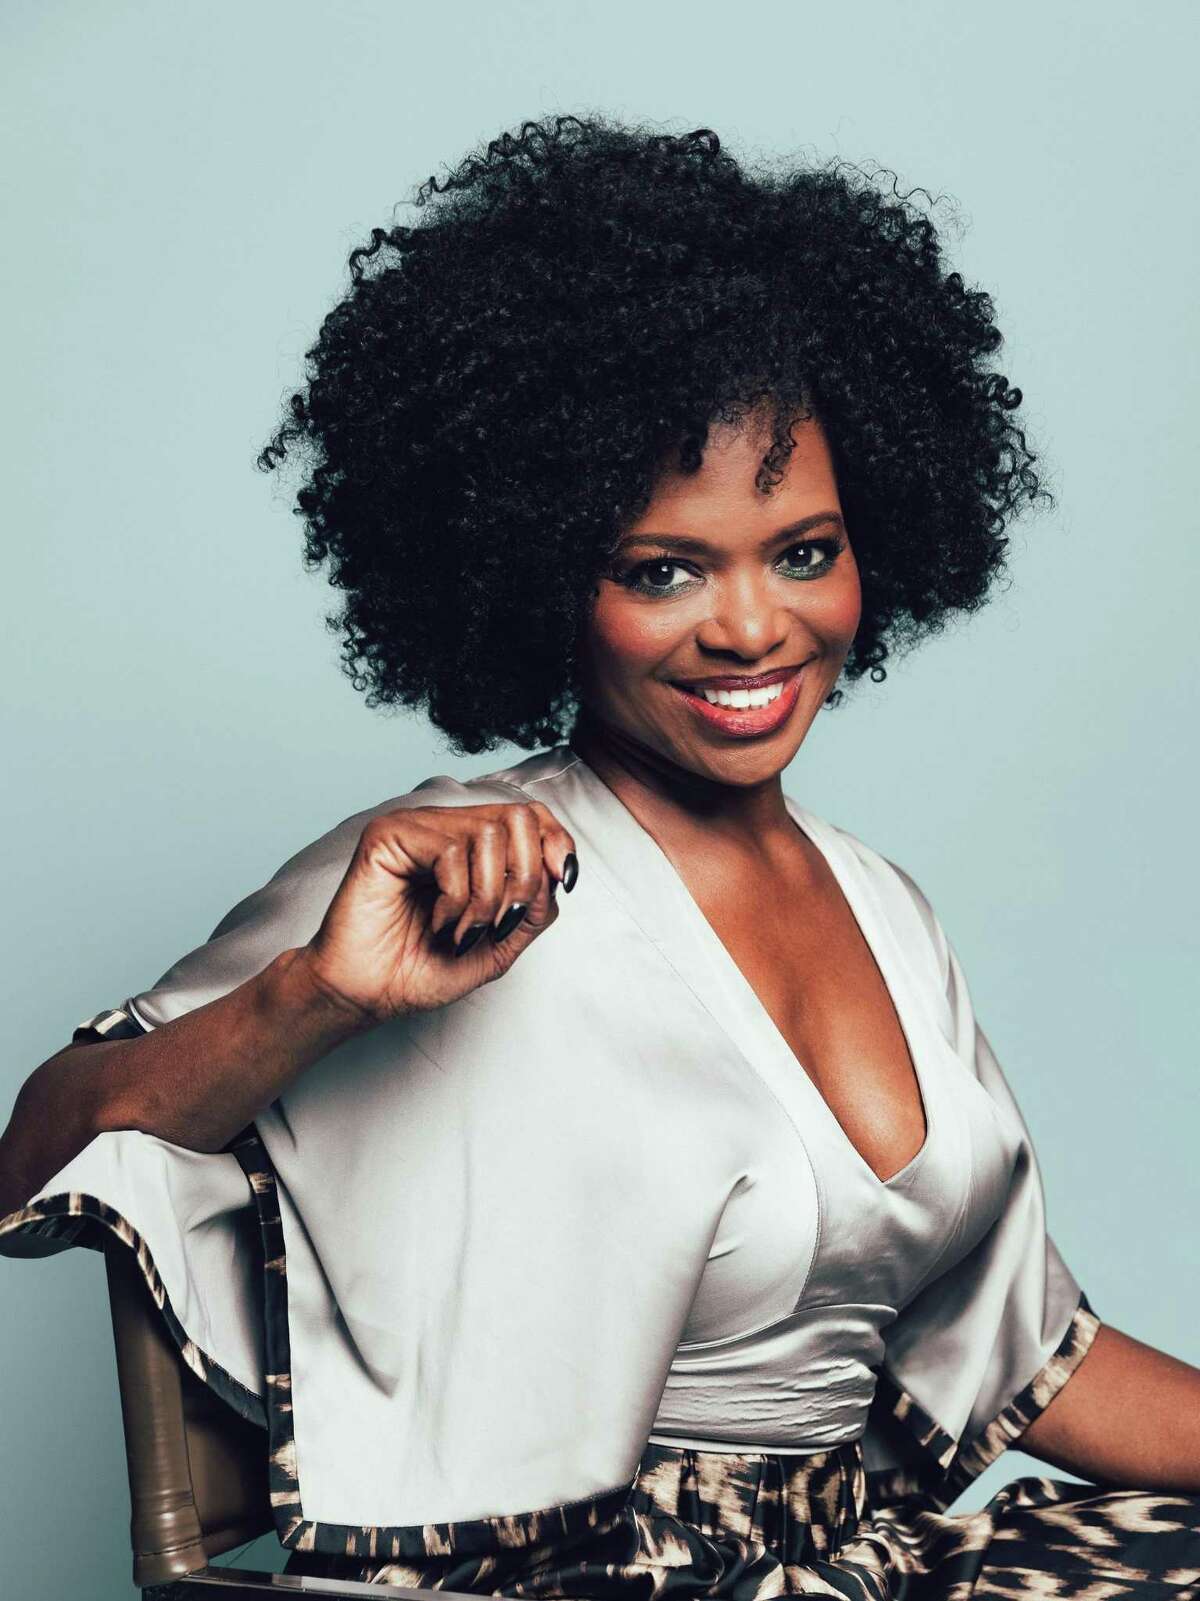 The singer/actor LaChanze relates well to Donna Summer, who she portrays in a Broadway musical.